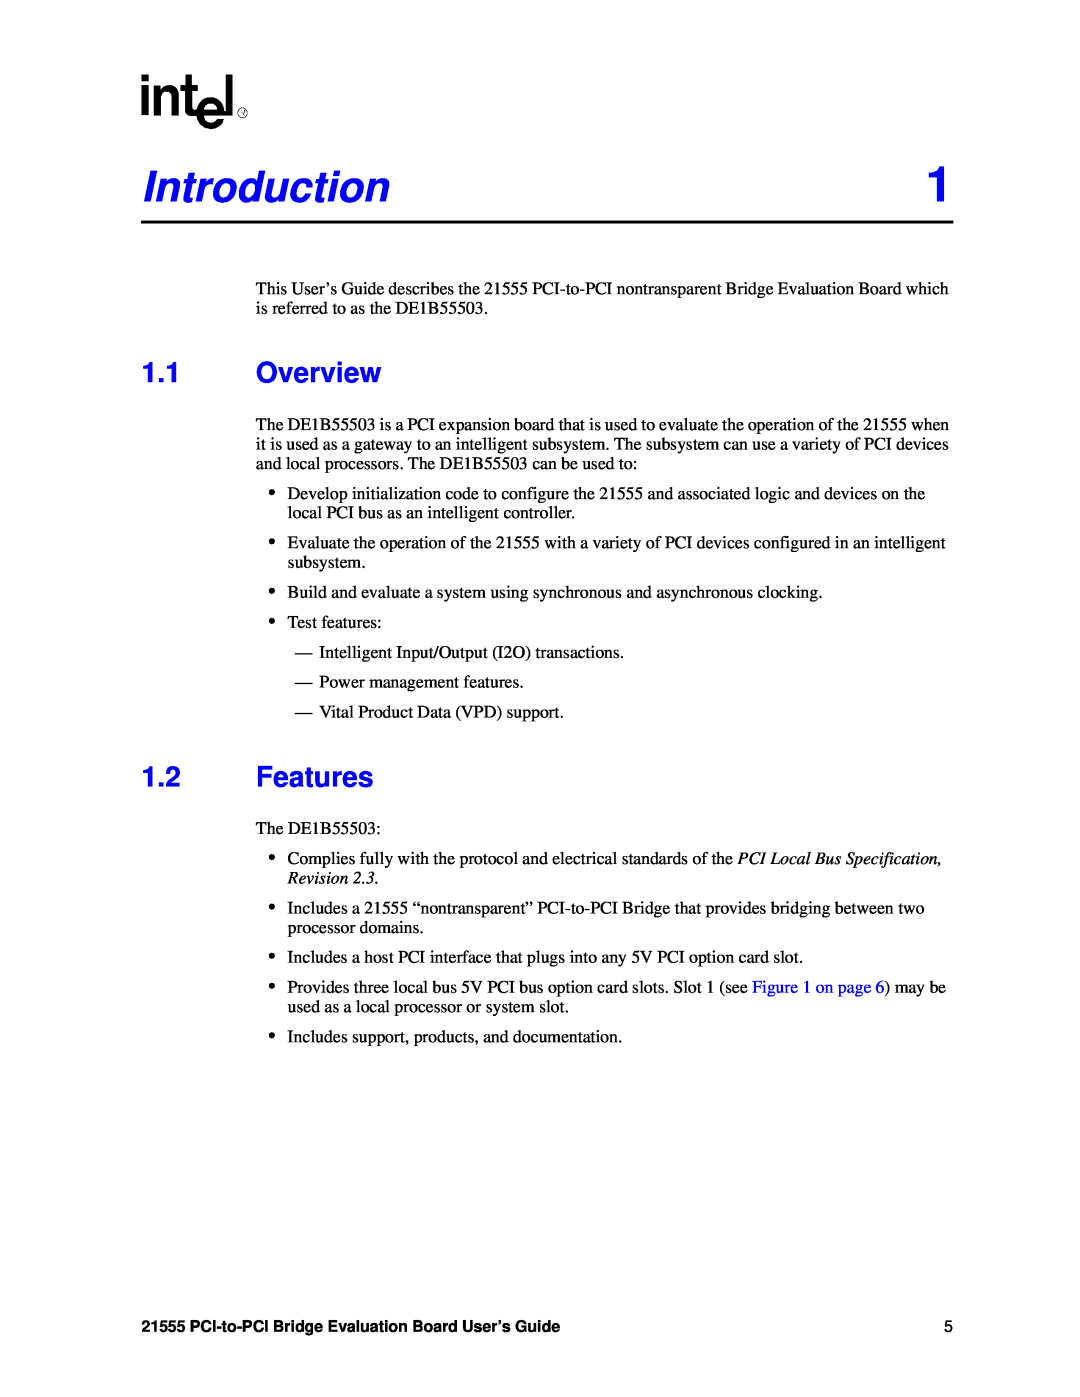 Intel 21555 manual Introduction, Overview, Features 